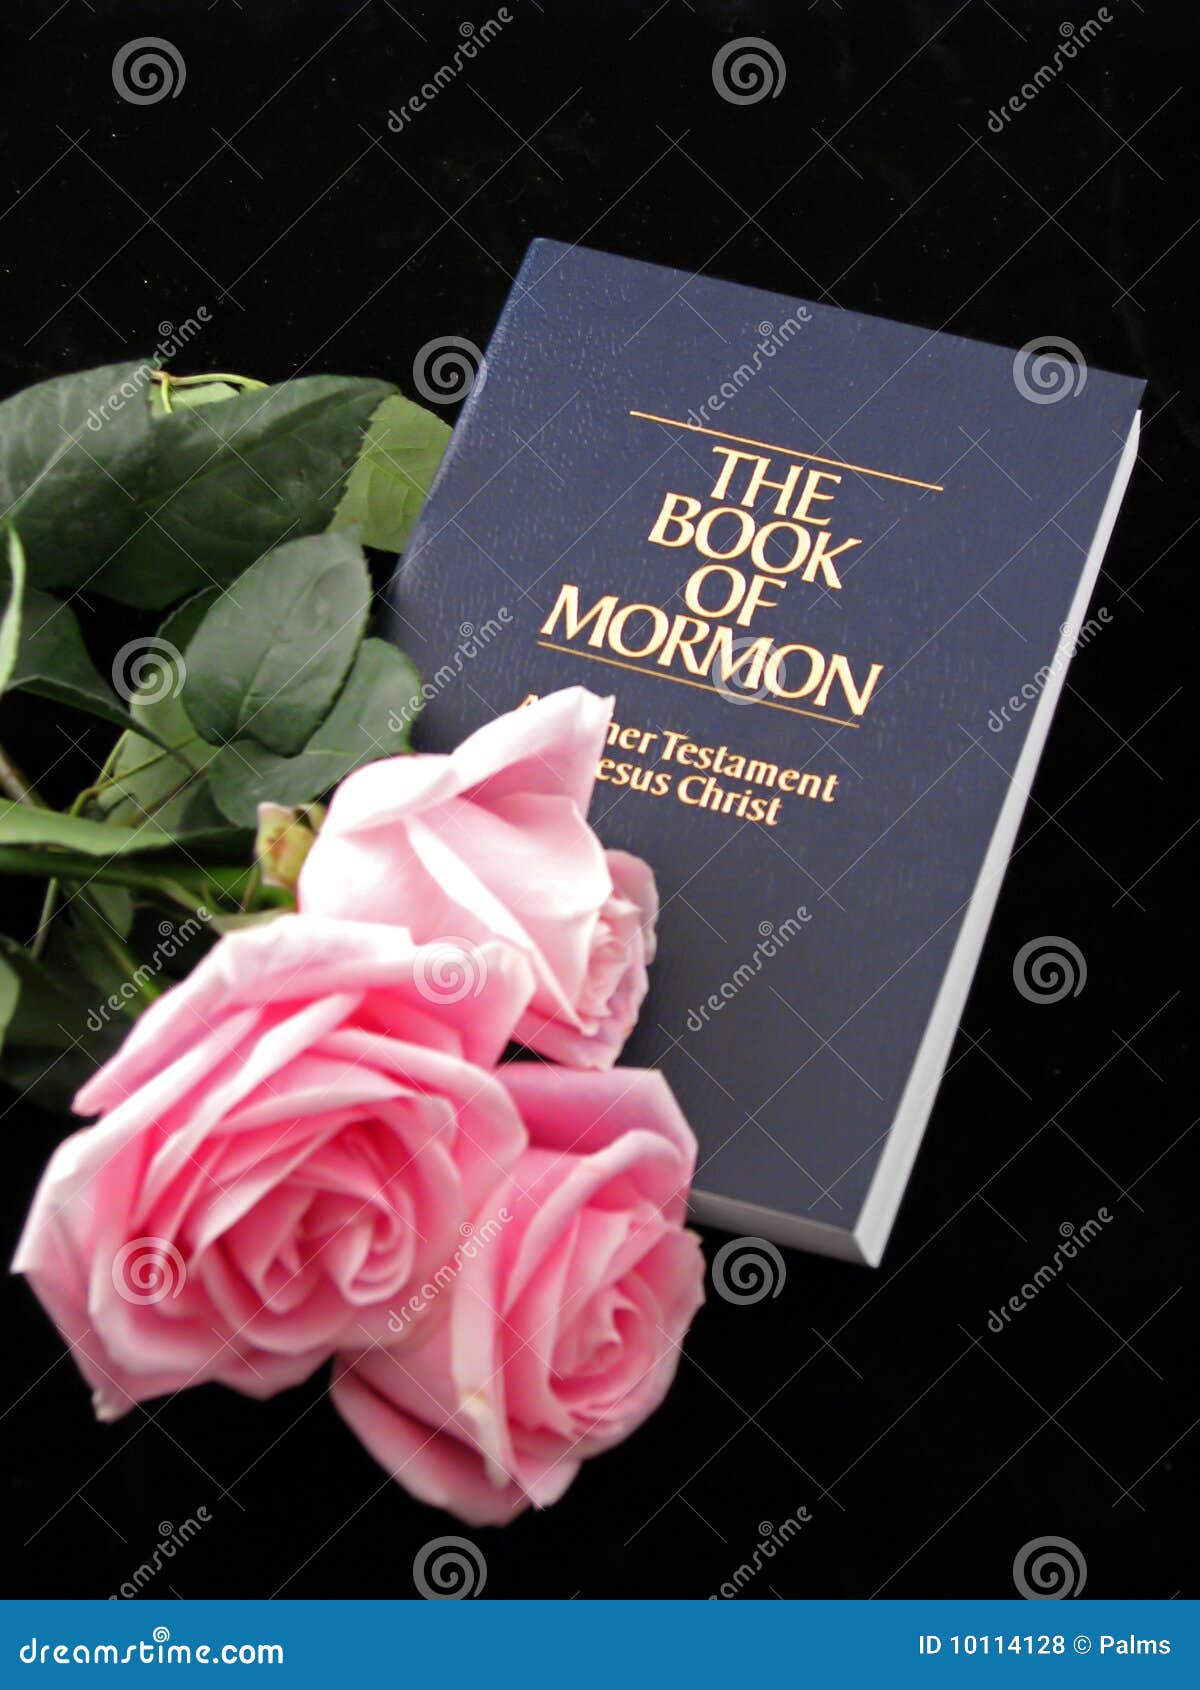 book of mormon and roses